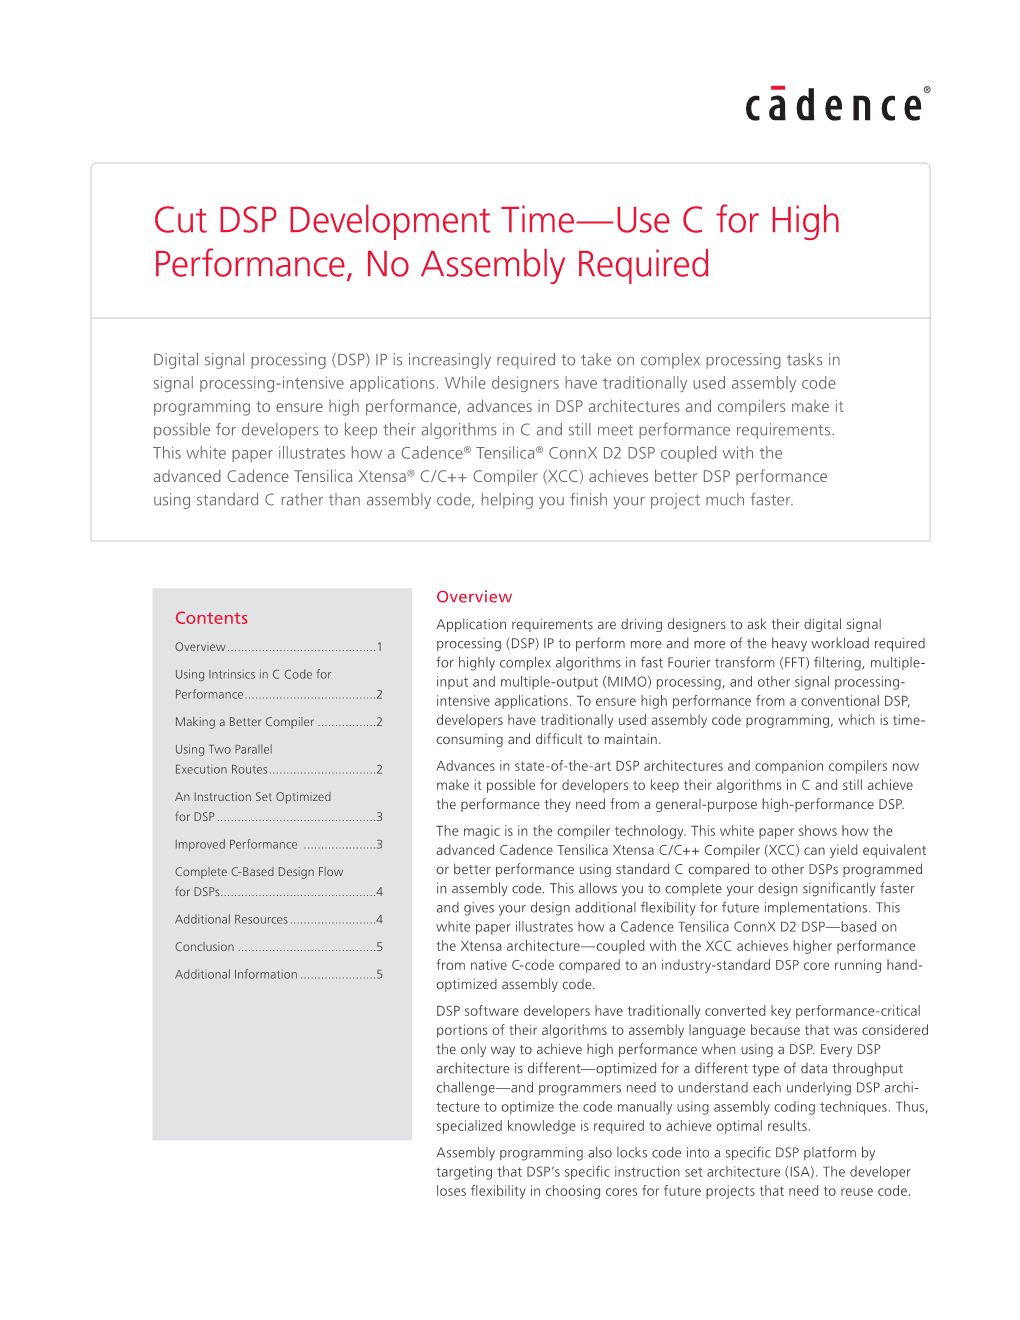 Cut DSP Development Time--Use C for High Performance, No Assembly